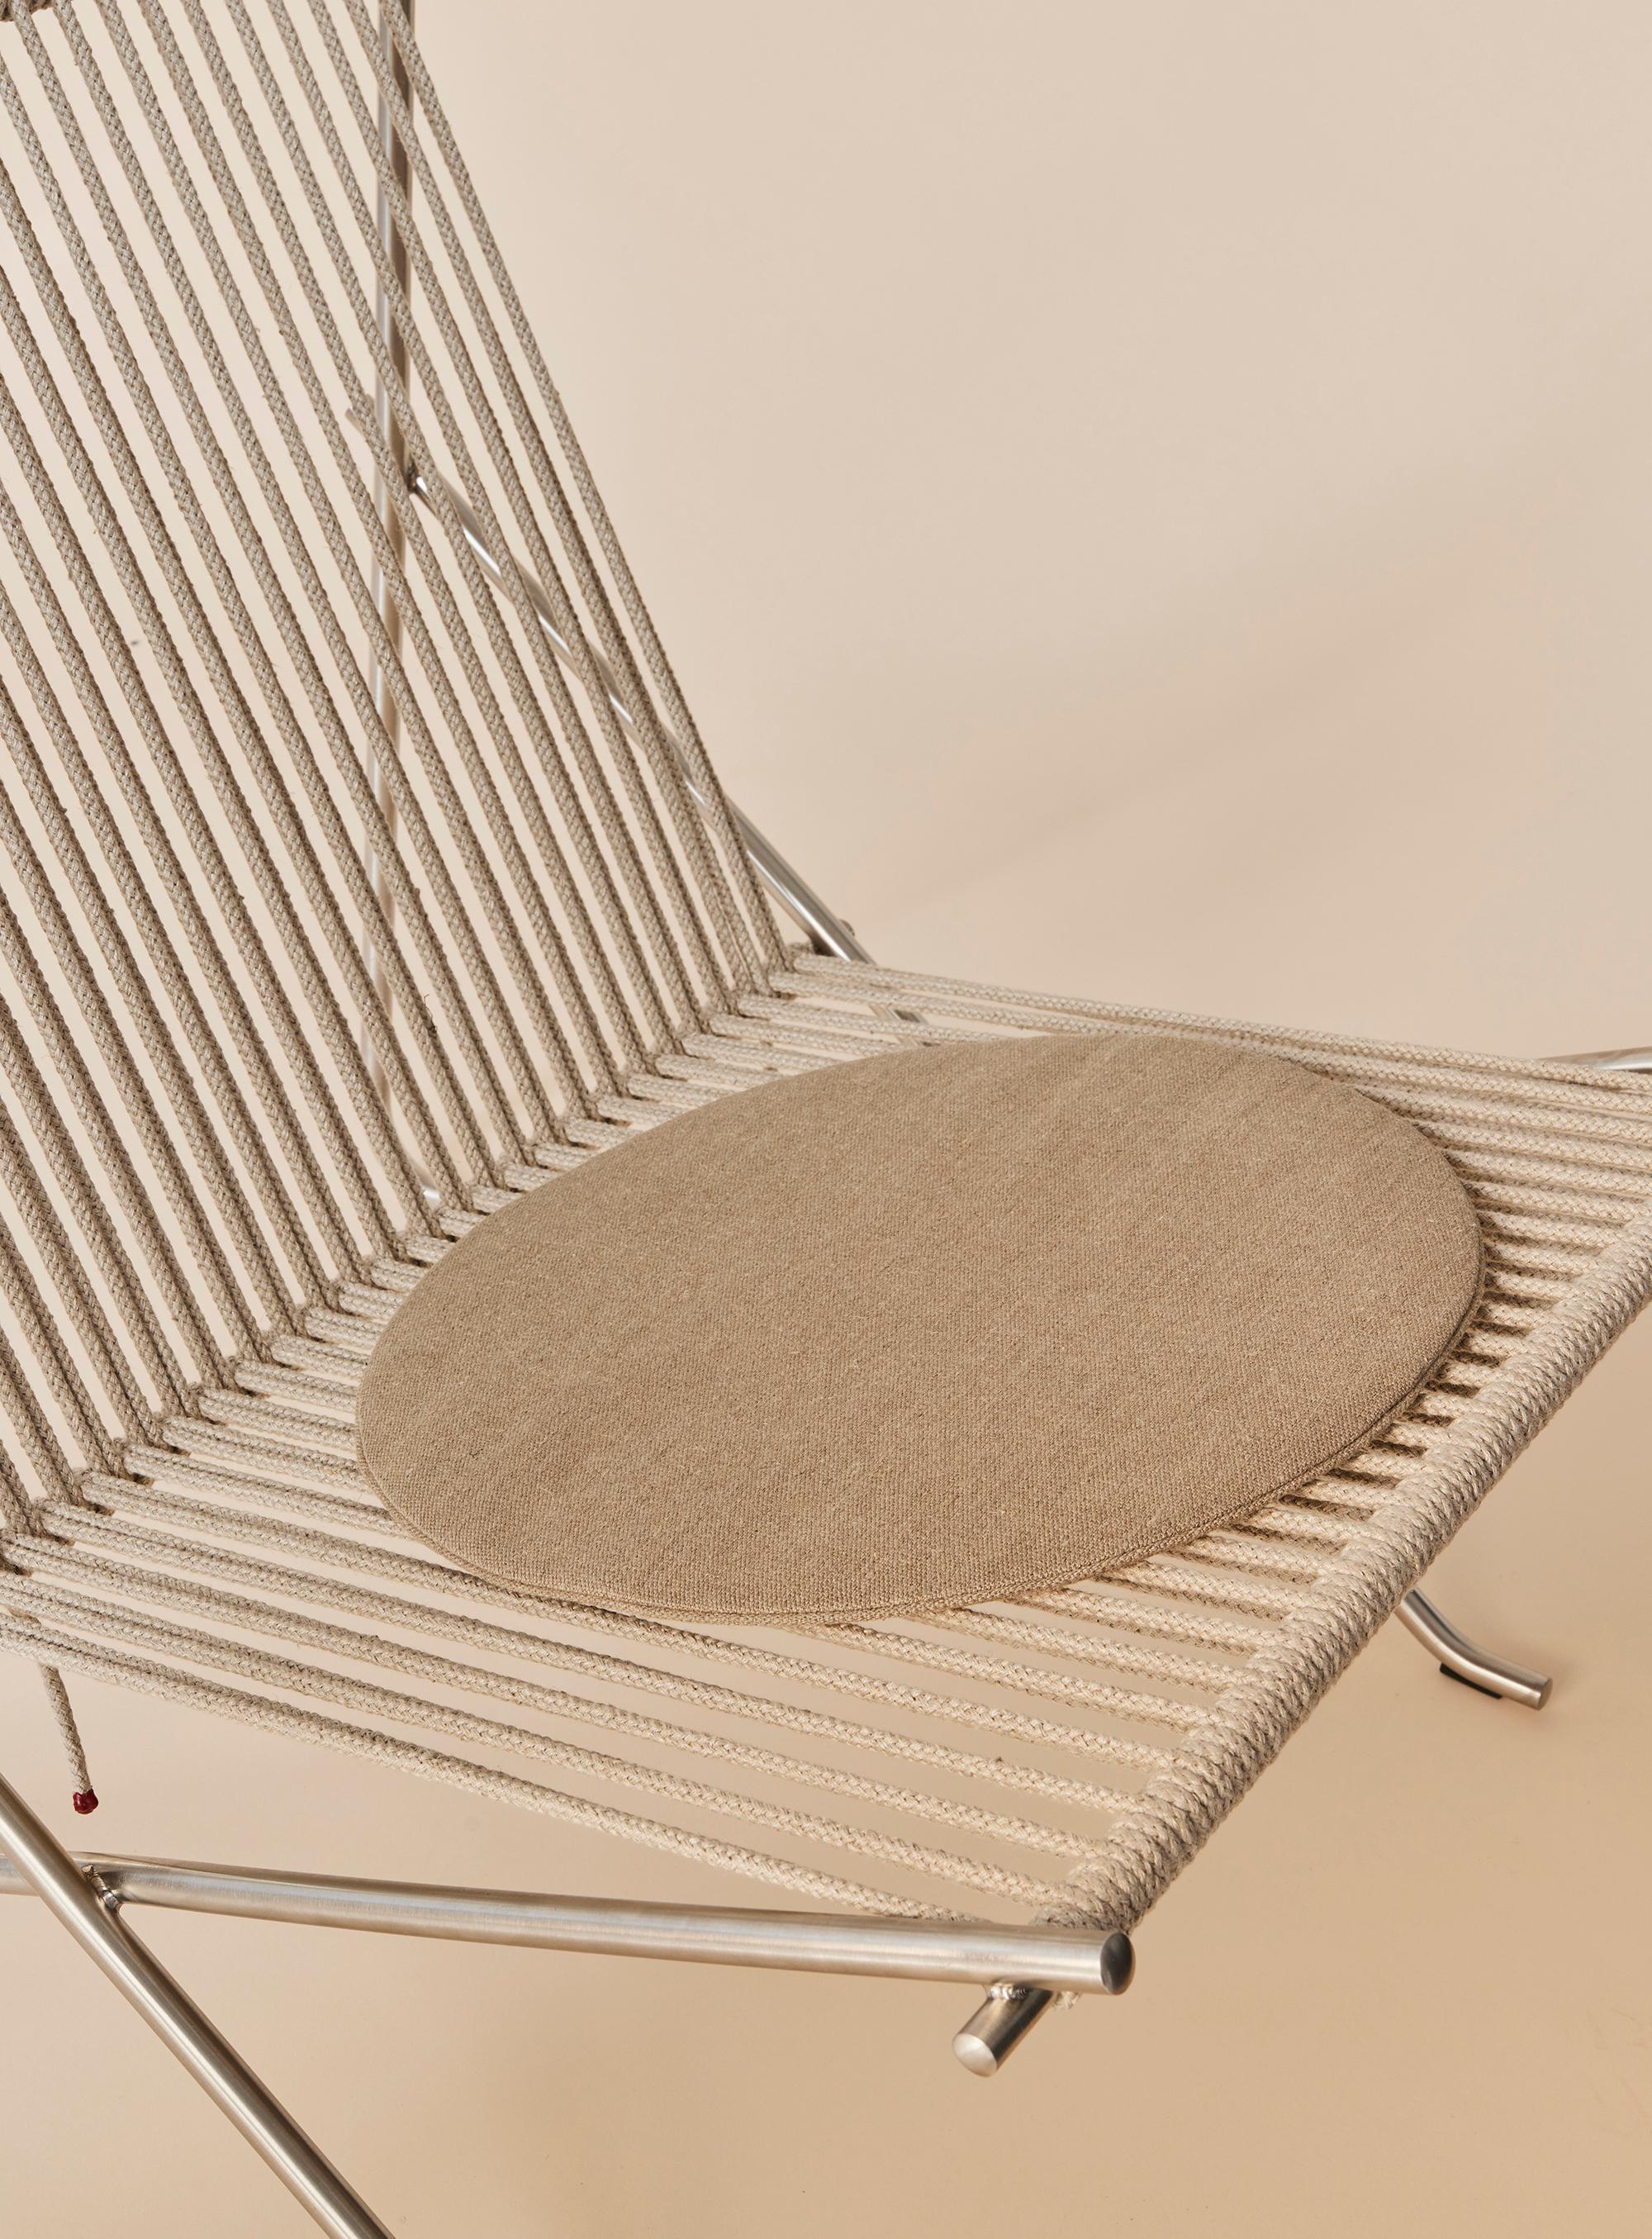 'PK4' Lounge Chair for Fritz Hansen in Natural Flag Halyard with Steel Frame For Sale 9